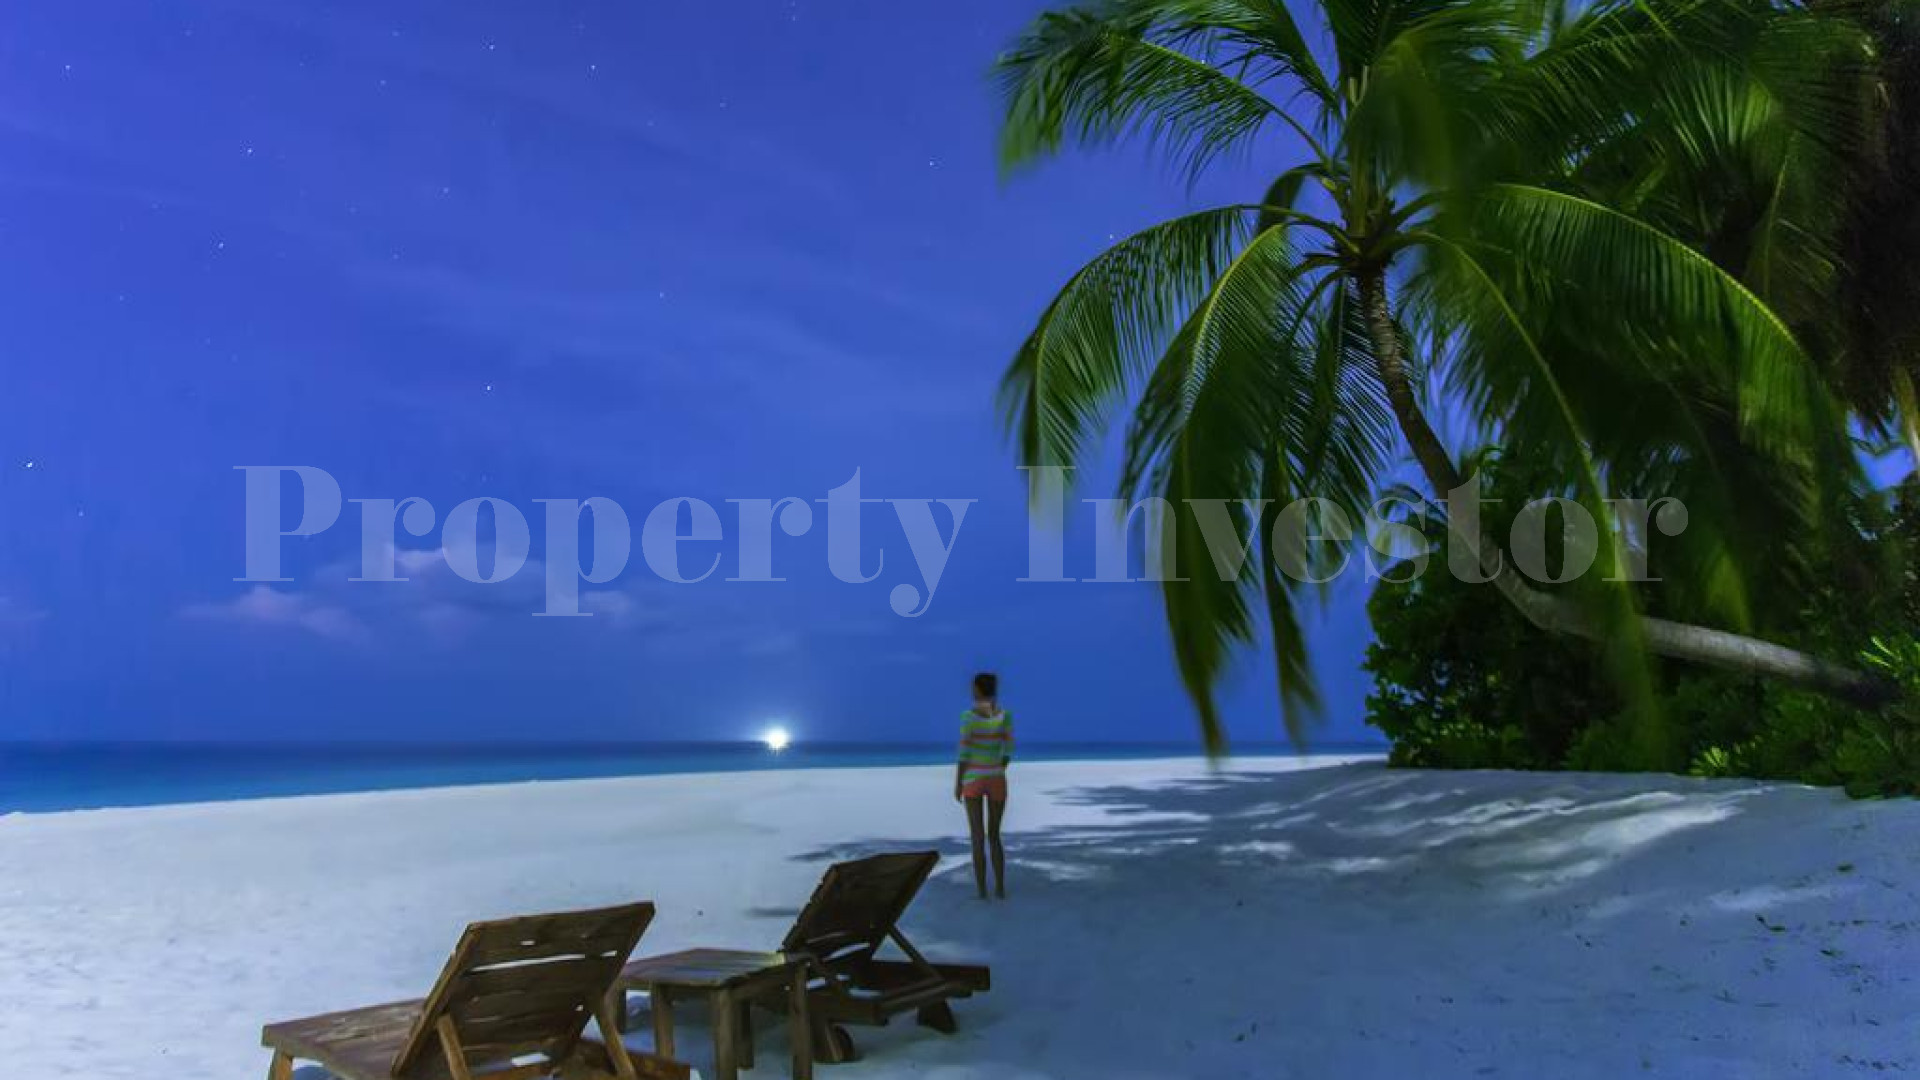 Exclusive 32 Room Island Eco Resort with 89 Room Overwater Bungalow Expansion Plan for Sale in the Maldives